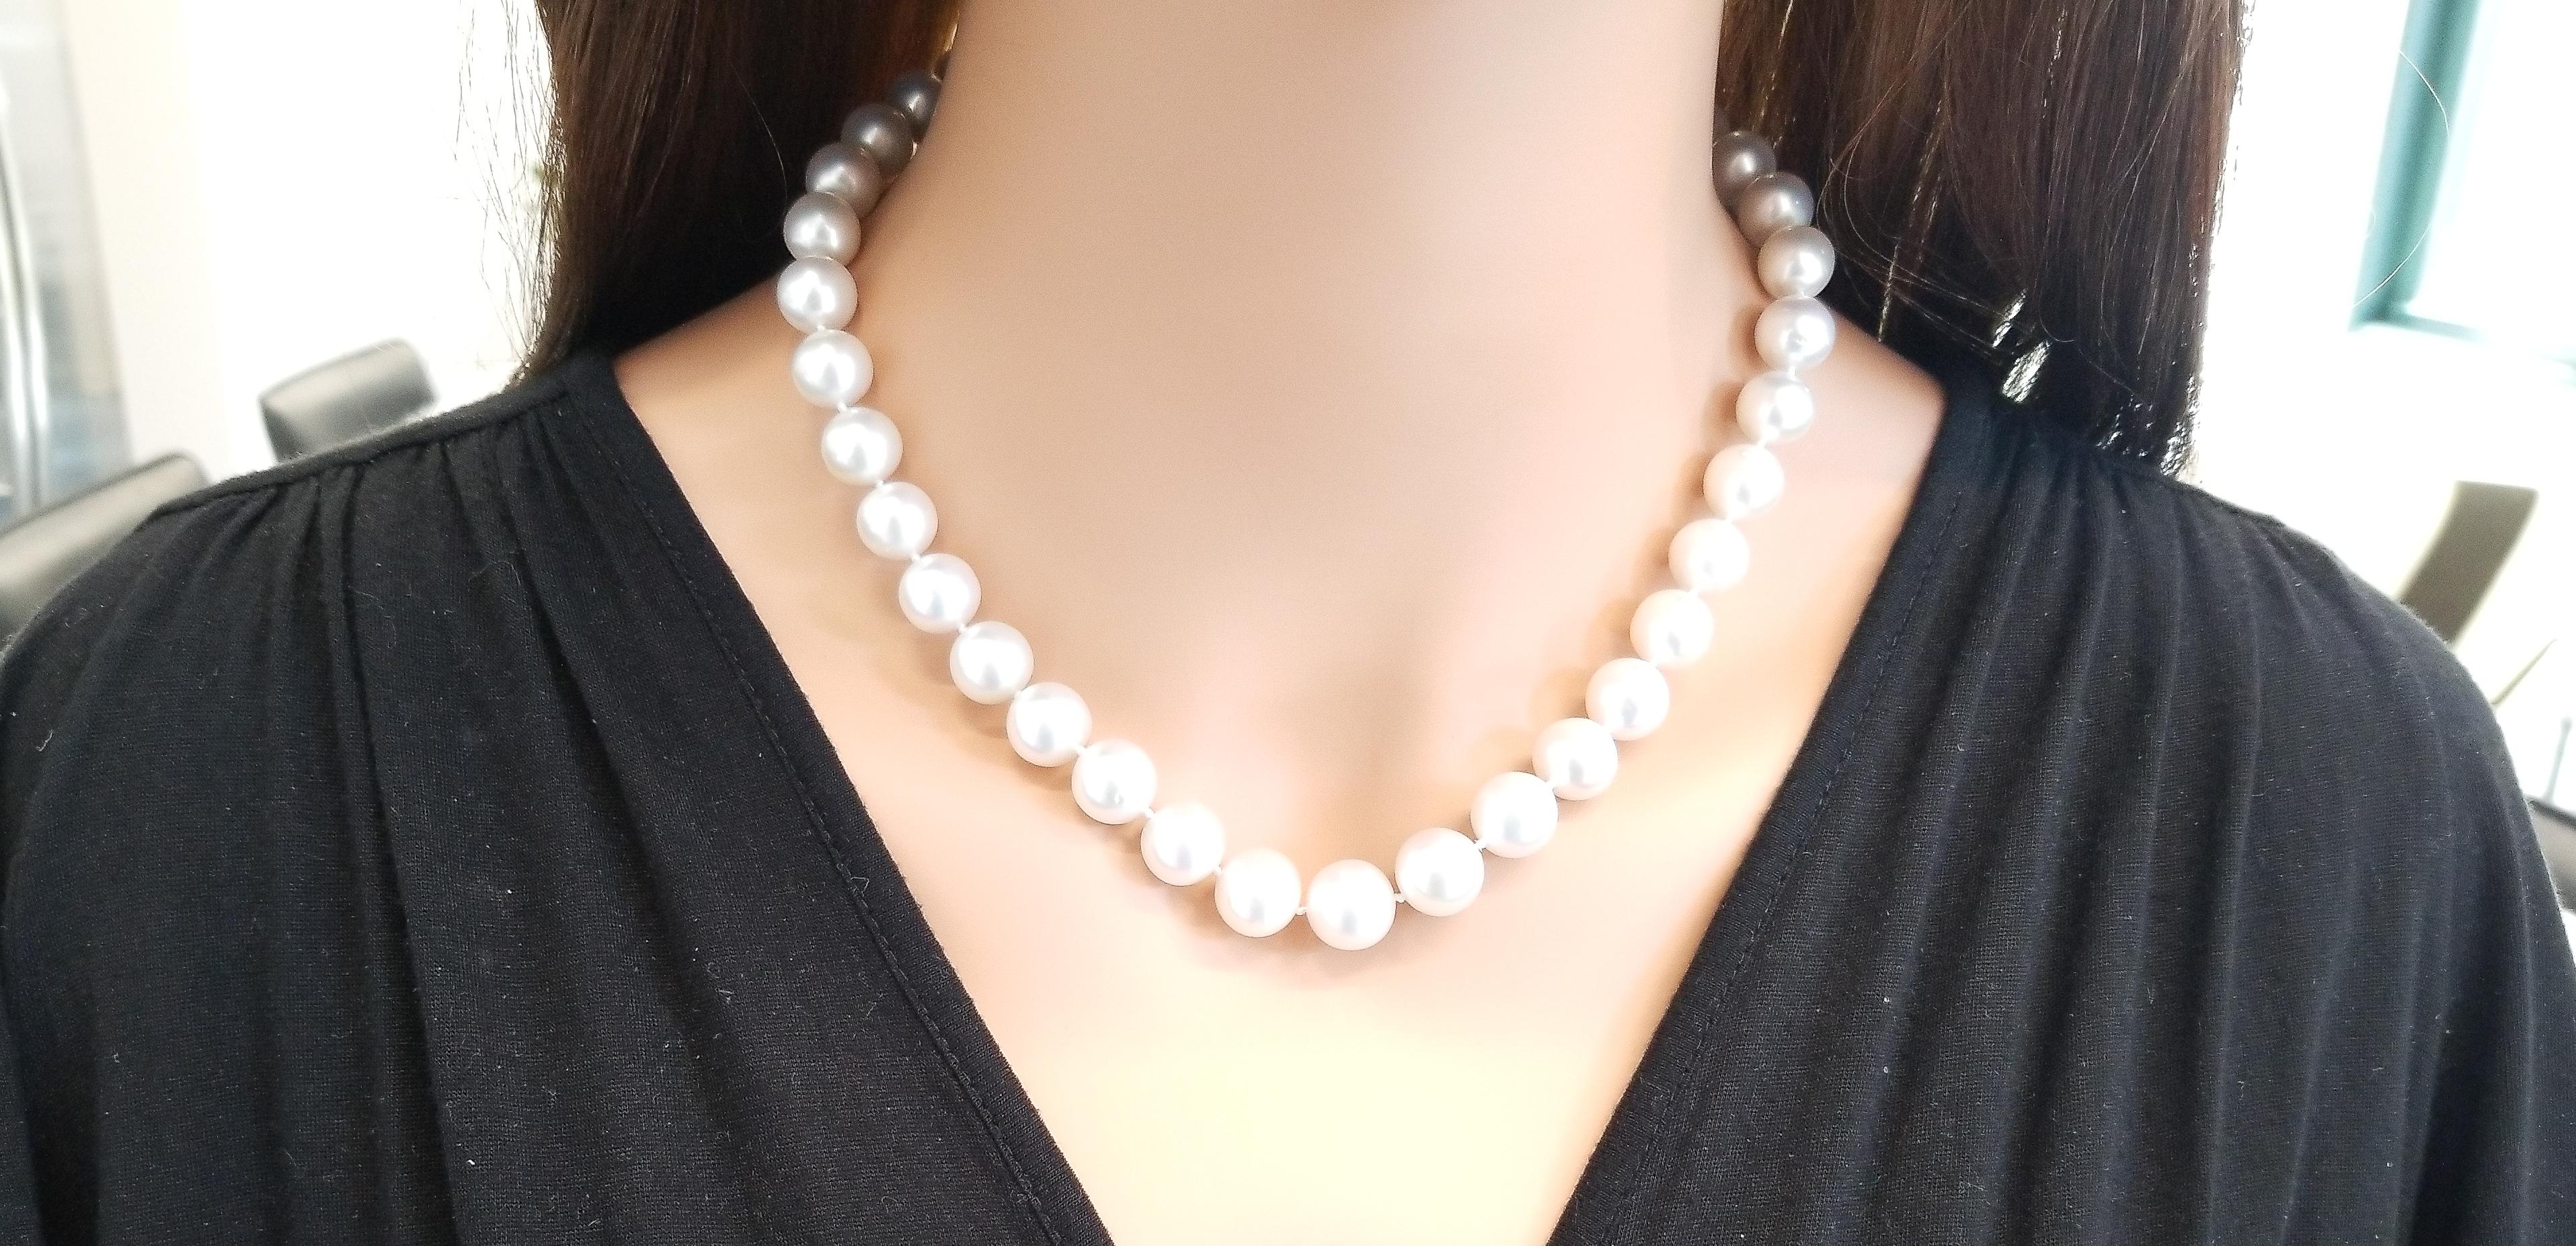 Highly sought after for their incredible luster, South Sea pearls are an elegant and stylish addition to your look. This stunning strand of ivory white South Sea pearls feature 9.5-12.75 millimeter pearls. The silk strand is knotted between each